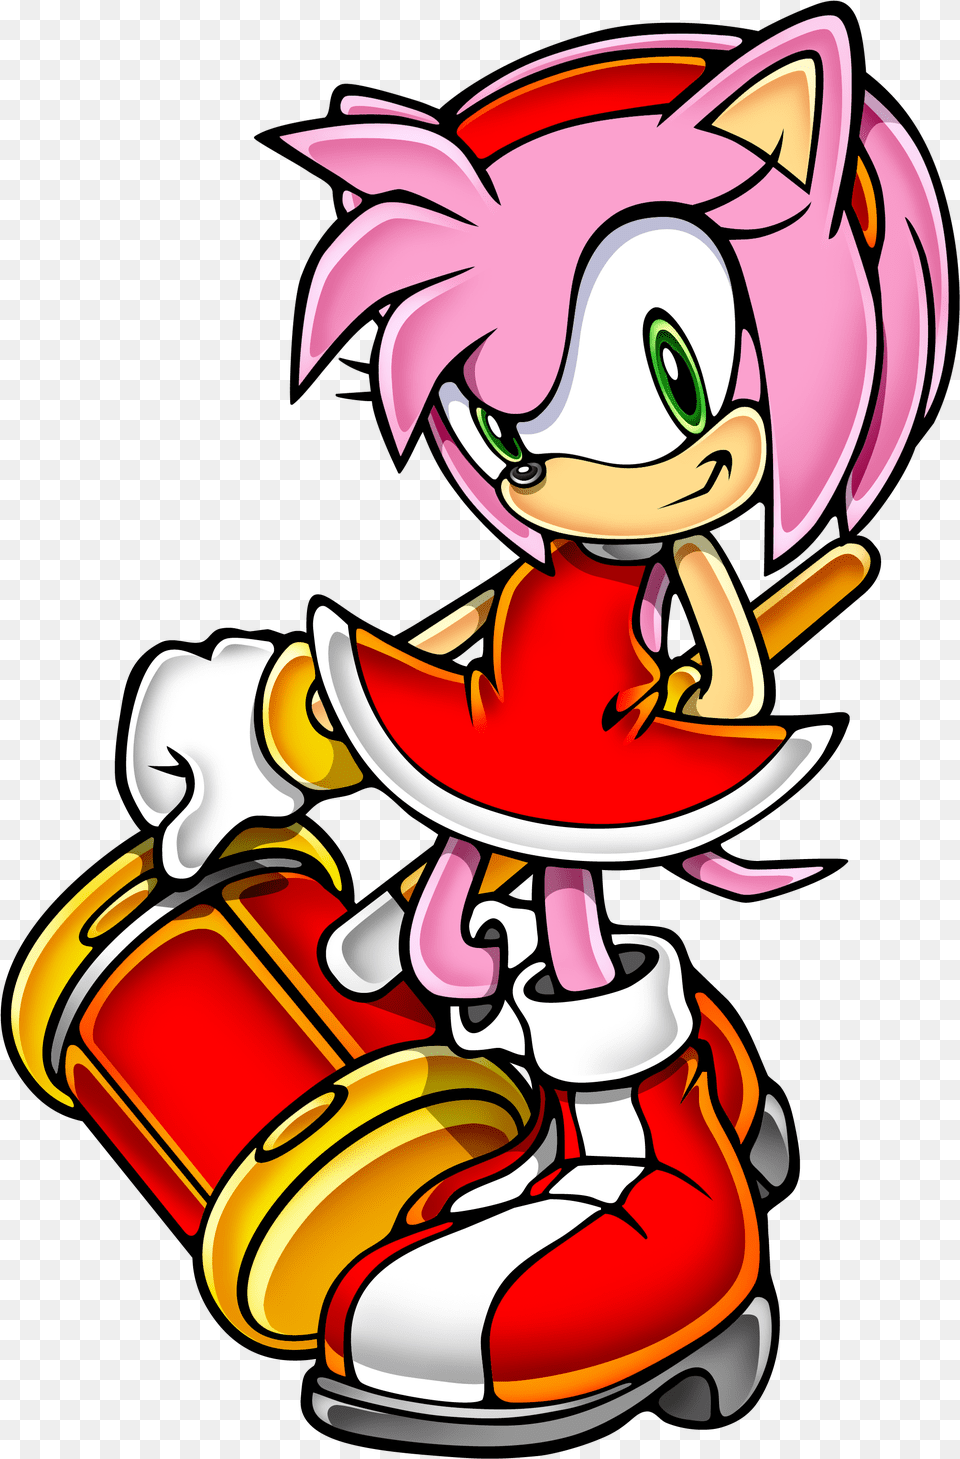 Sonic News Network Amy Rose Sonic Advance, Dynamite, Weapon, Cartoon Png